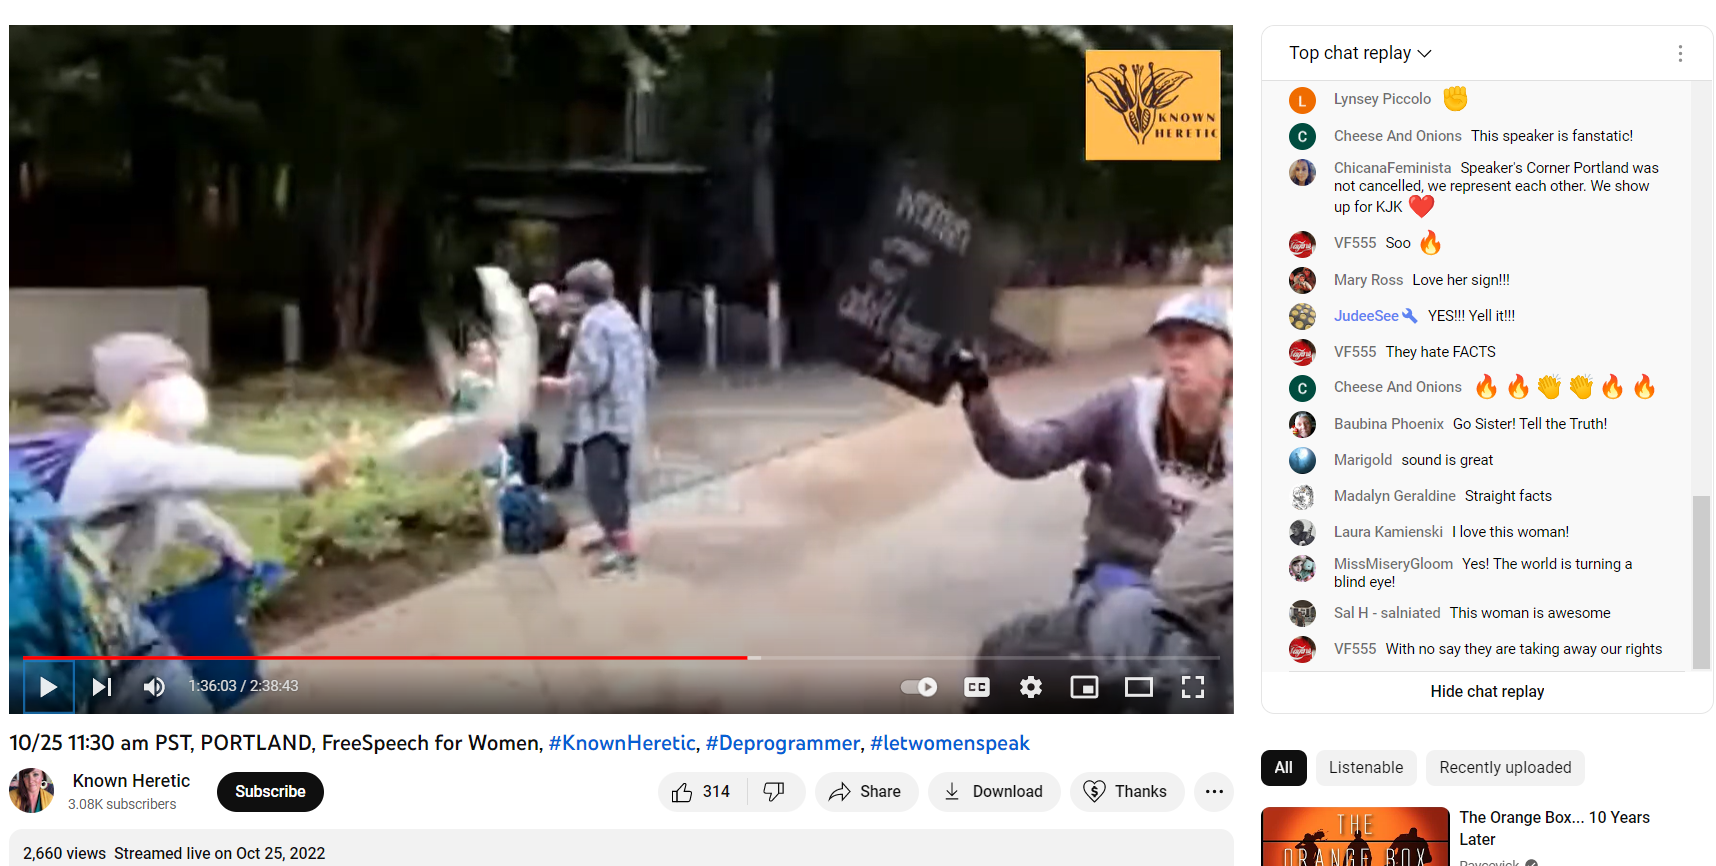 A screen capture of a YouTube video. A cream pie is in the center of frame, being thrown by a person whose identity is disguised. A woman at the right attempts to use her transphobic sign to block